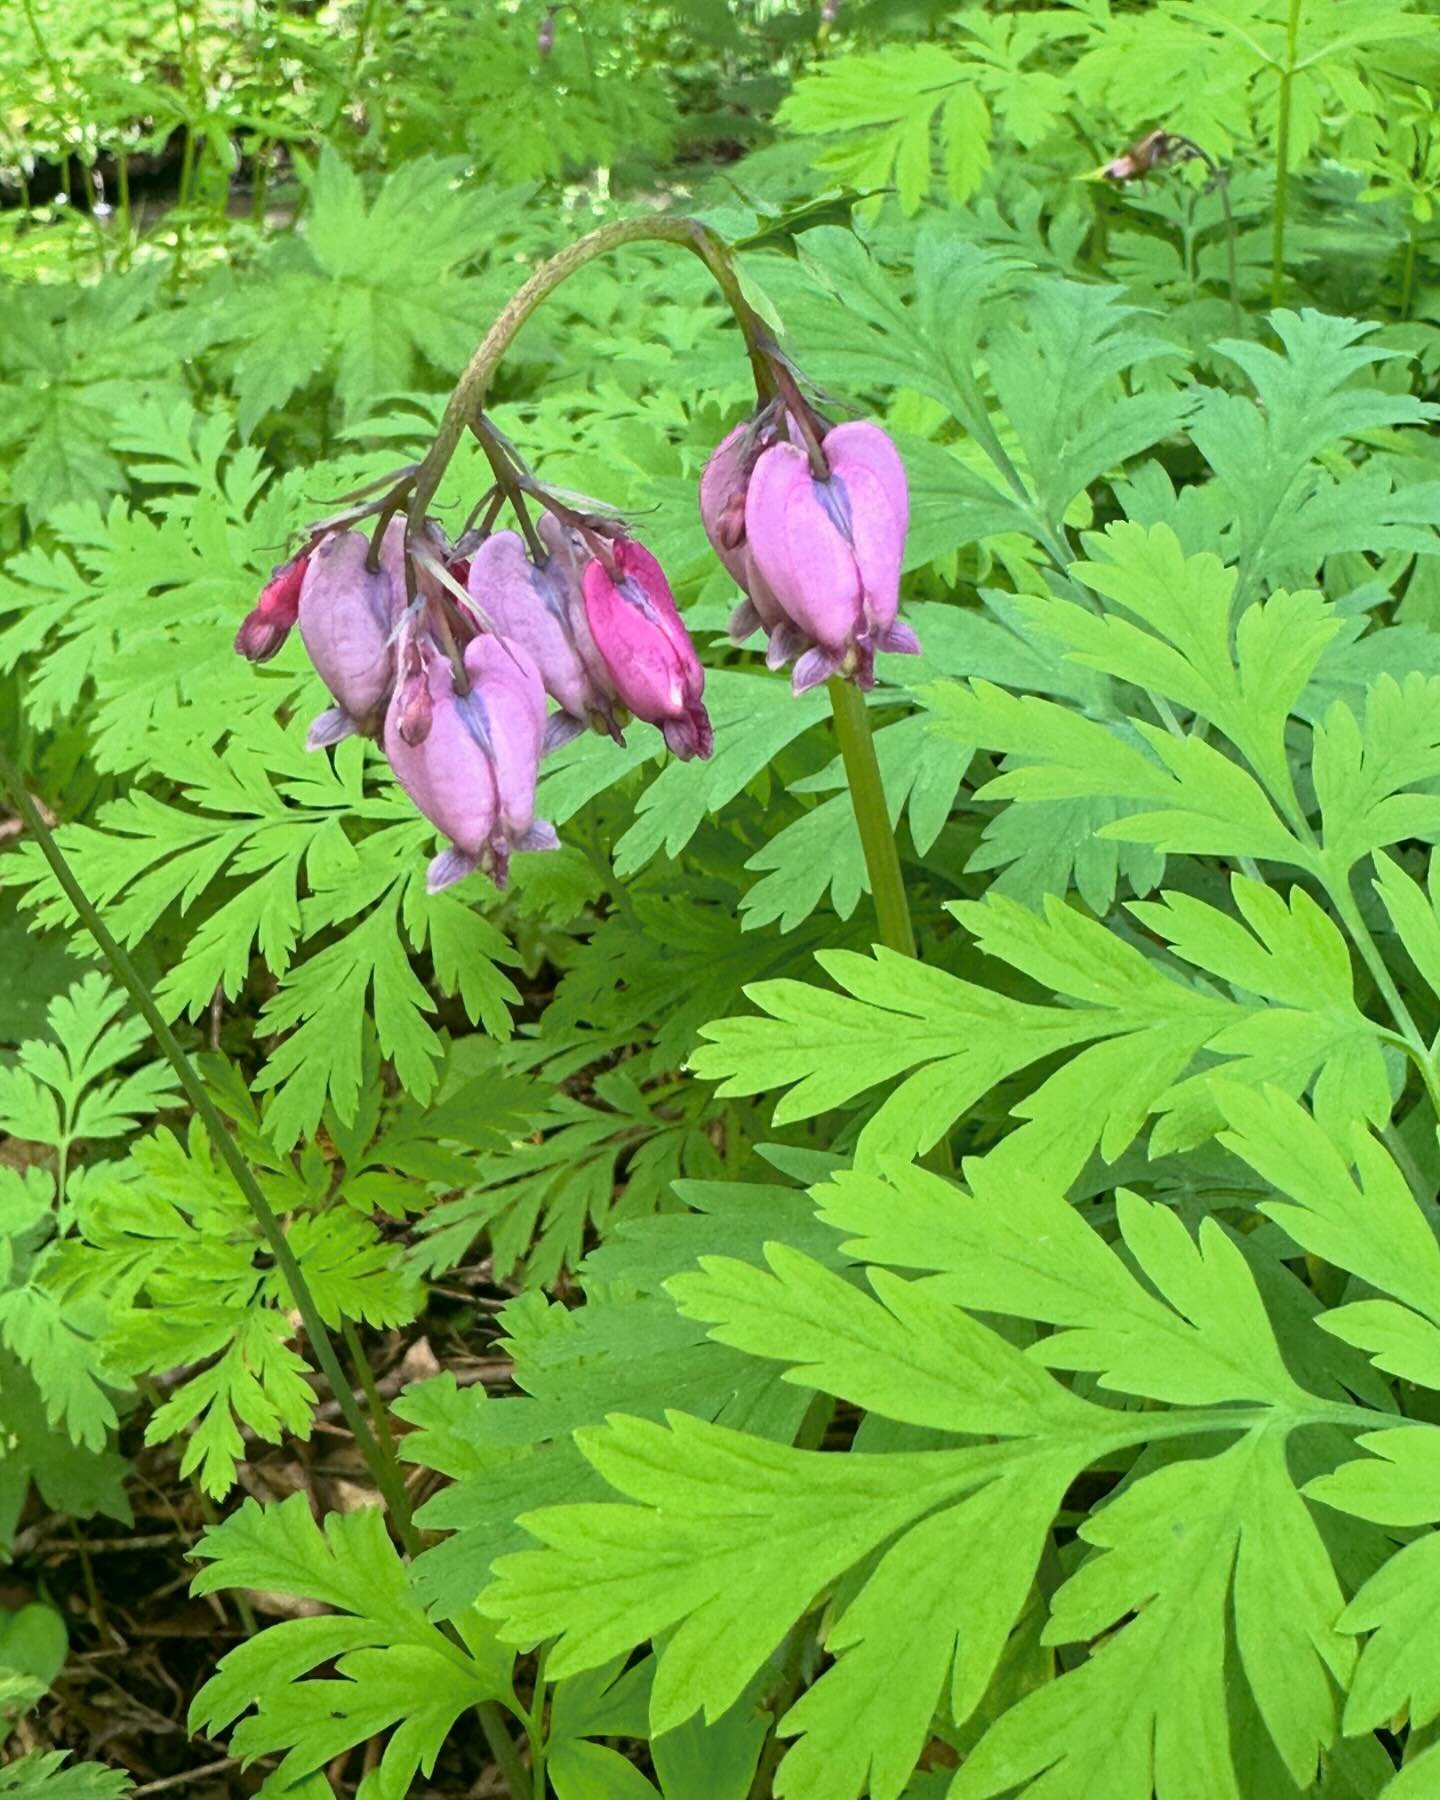 Featured Plant Friday - Every Friday we will be featuring a new plant from the property.
Pacific Bleeding Heart - Dicentra formosa is a flowering plant with fern-like leaves and an inflorescence of drooping pink, purple, yellow or cream flowers nativ